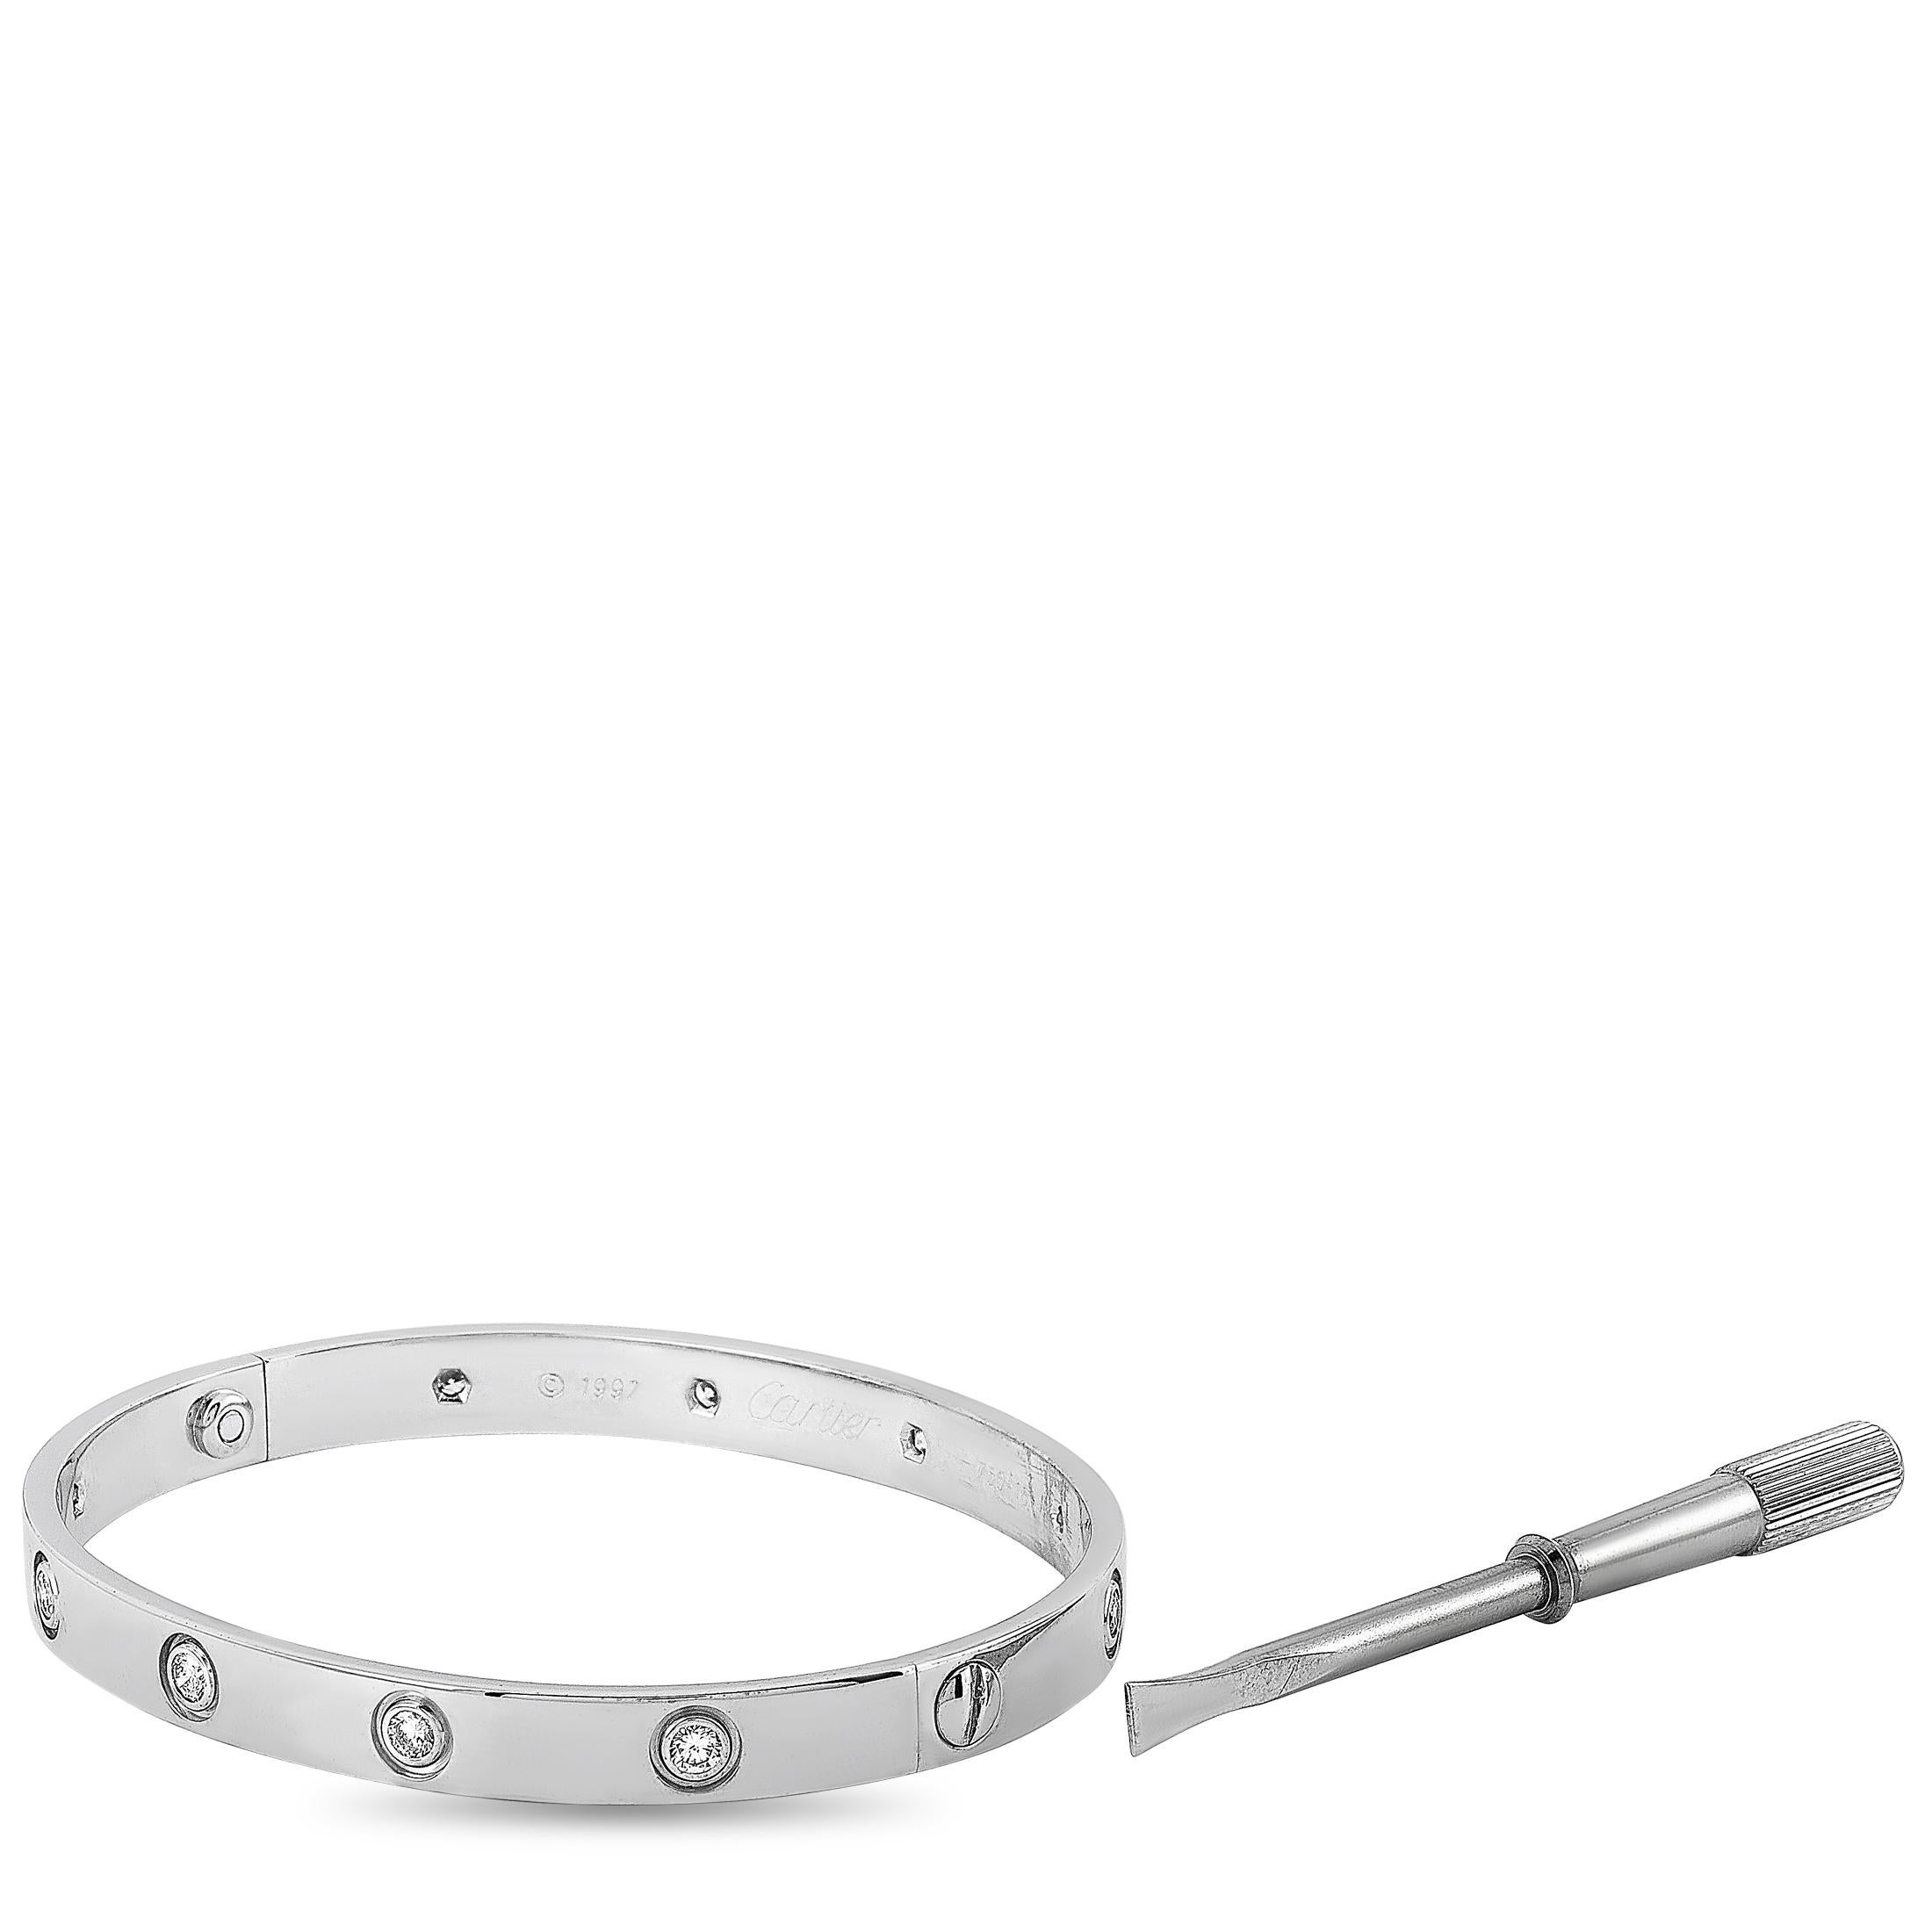 The Cartier “LOVE” bracelet is crafted from 18K white gold and set with 10 diamond stones that amount to 0.96 carats. The bracelet weighs 33.1 grams, measures 7.40” in length, and is delivered with a screwdriver.

This jewelry piece is offered in